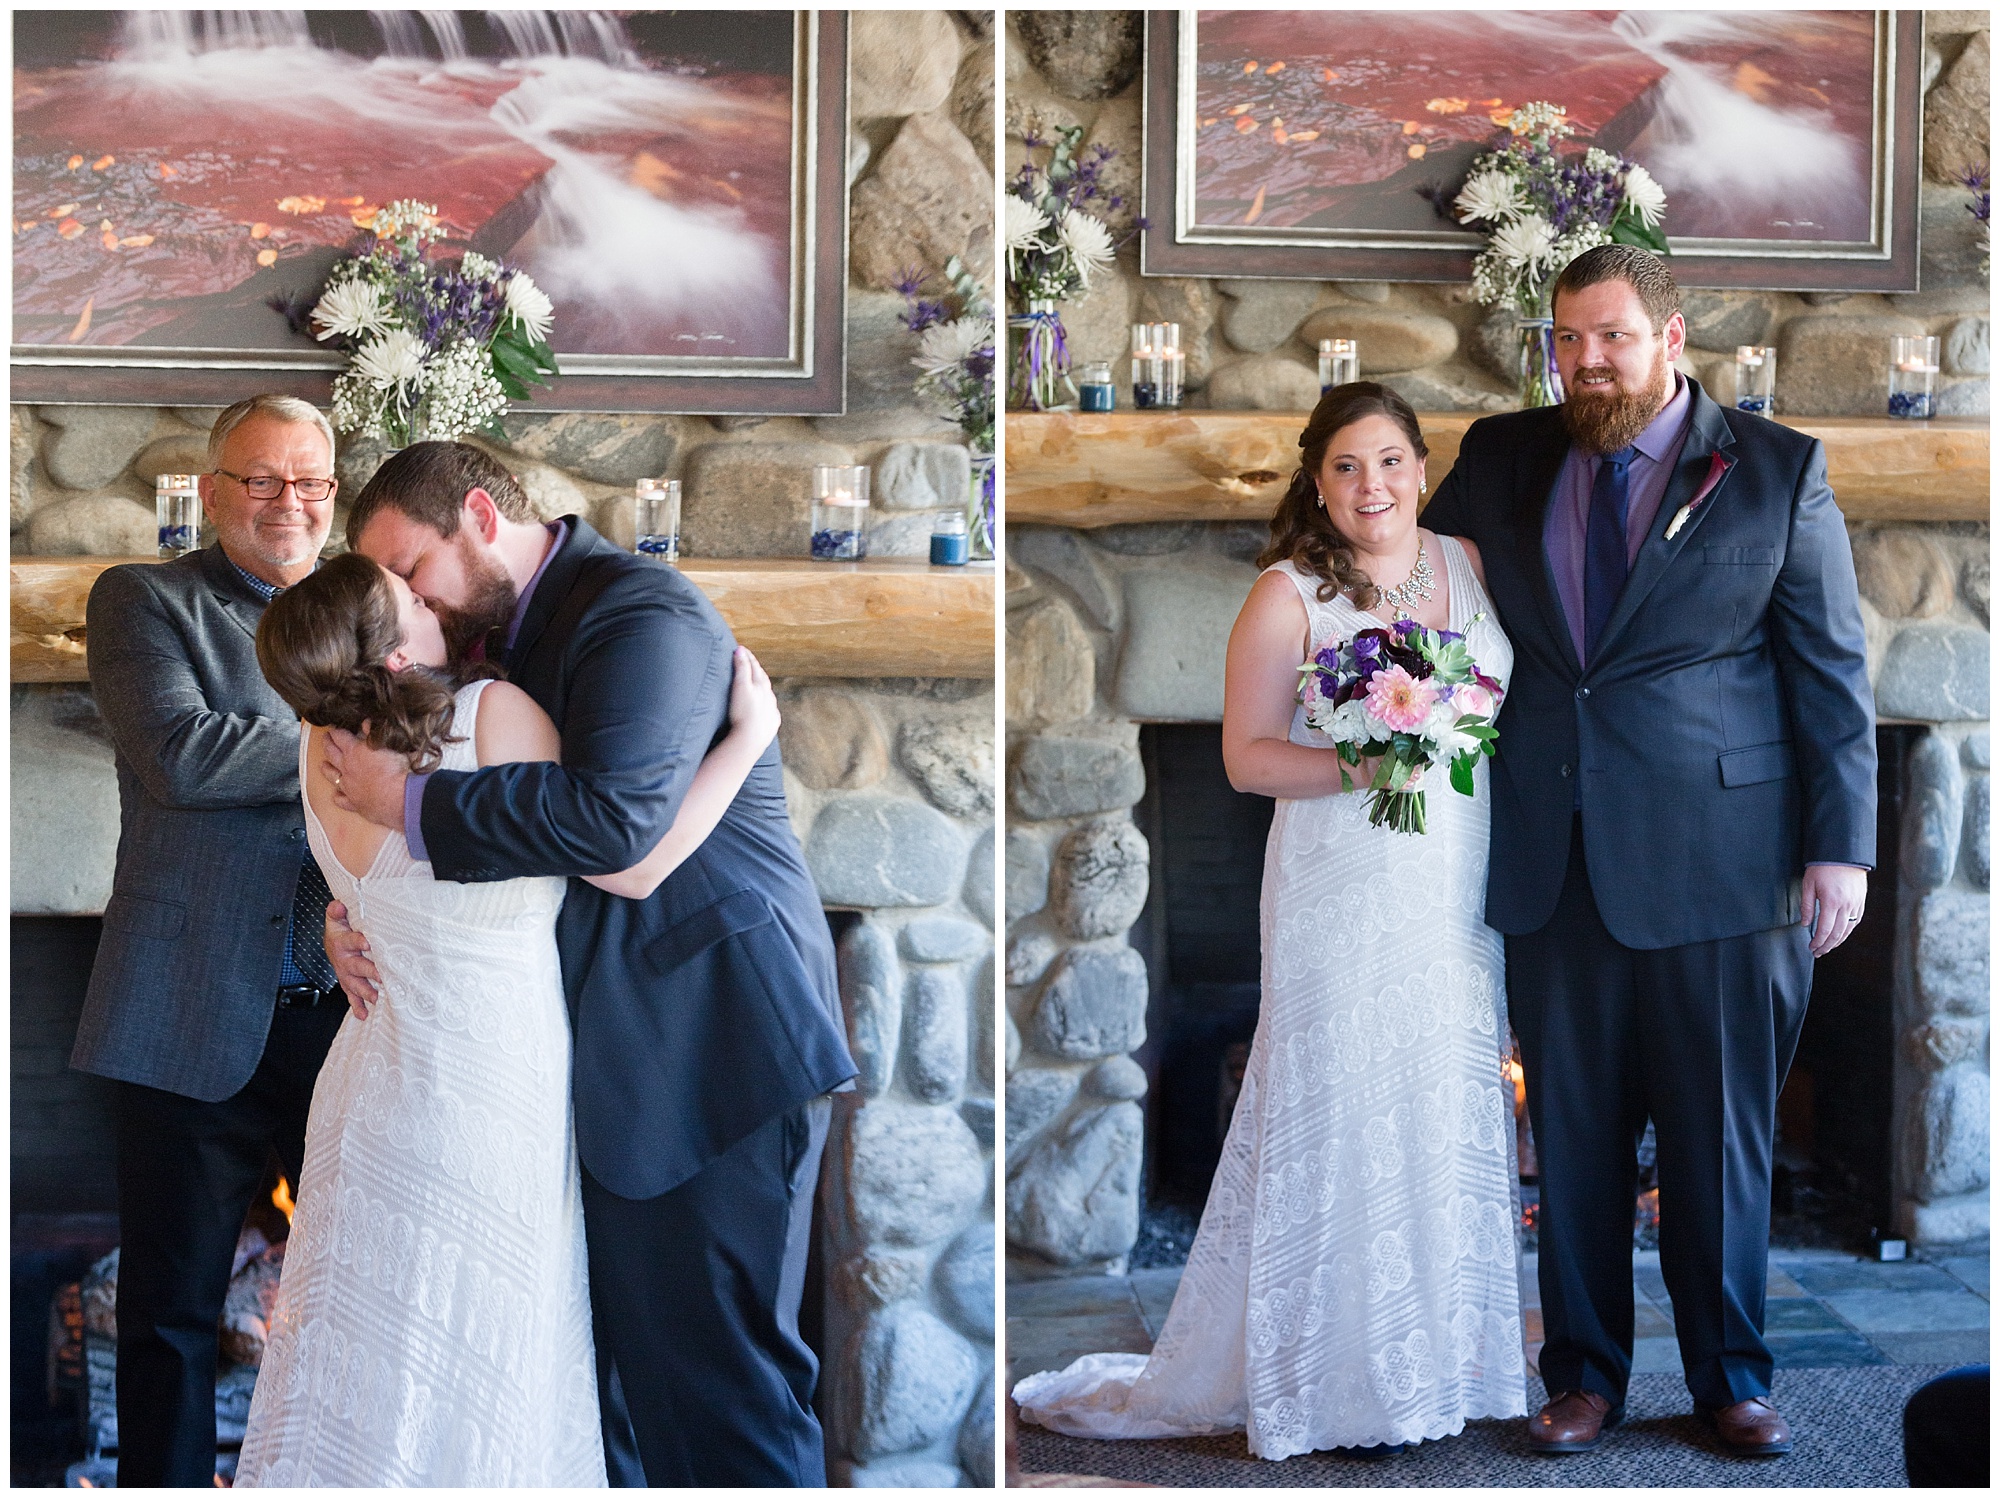 The wedding couple share their first kiss at their elopement ceremony in Breckenridge Colorado.